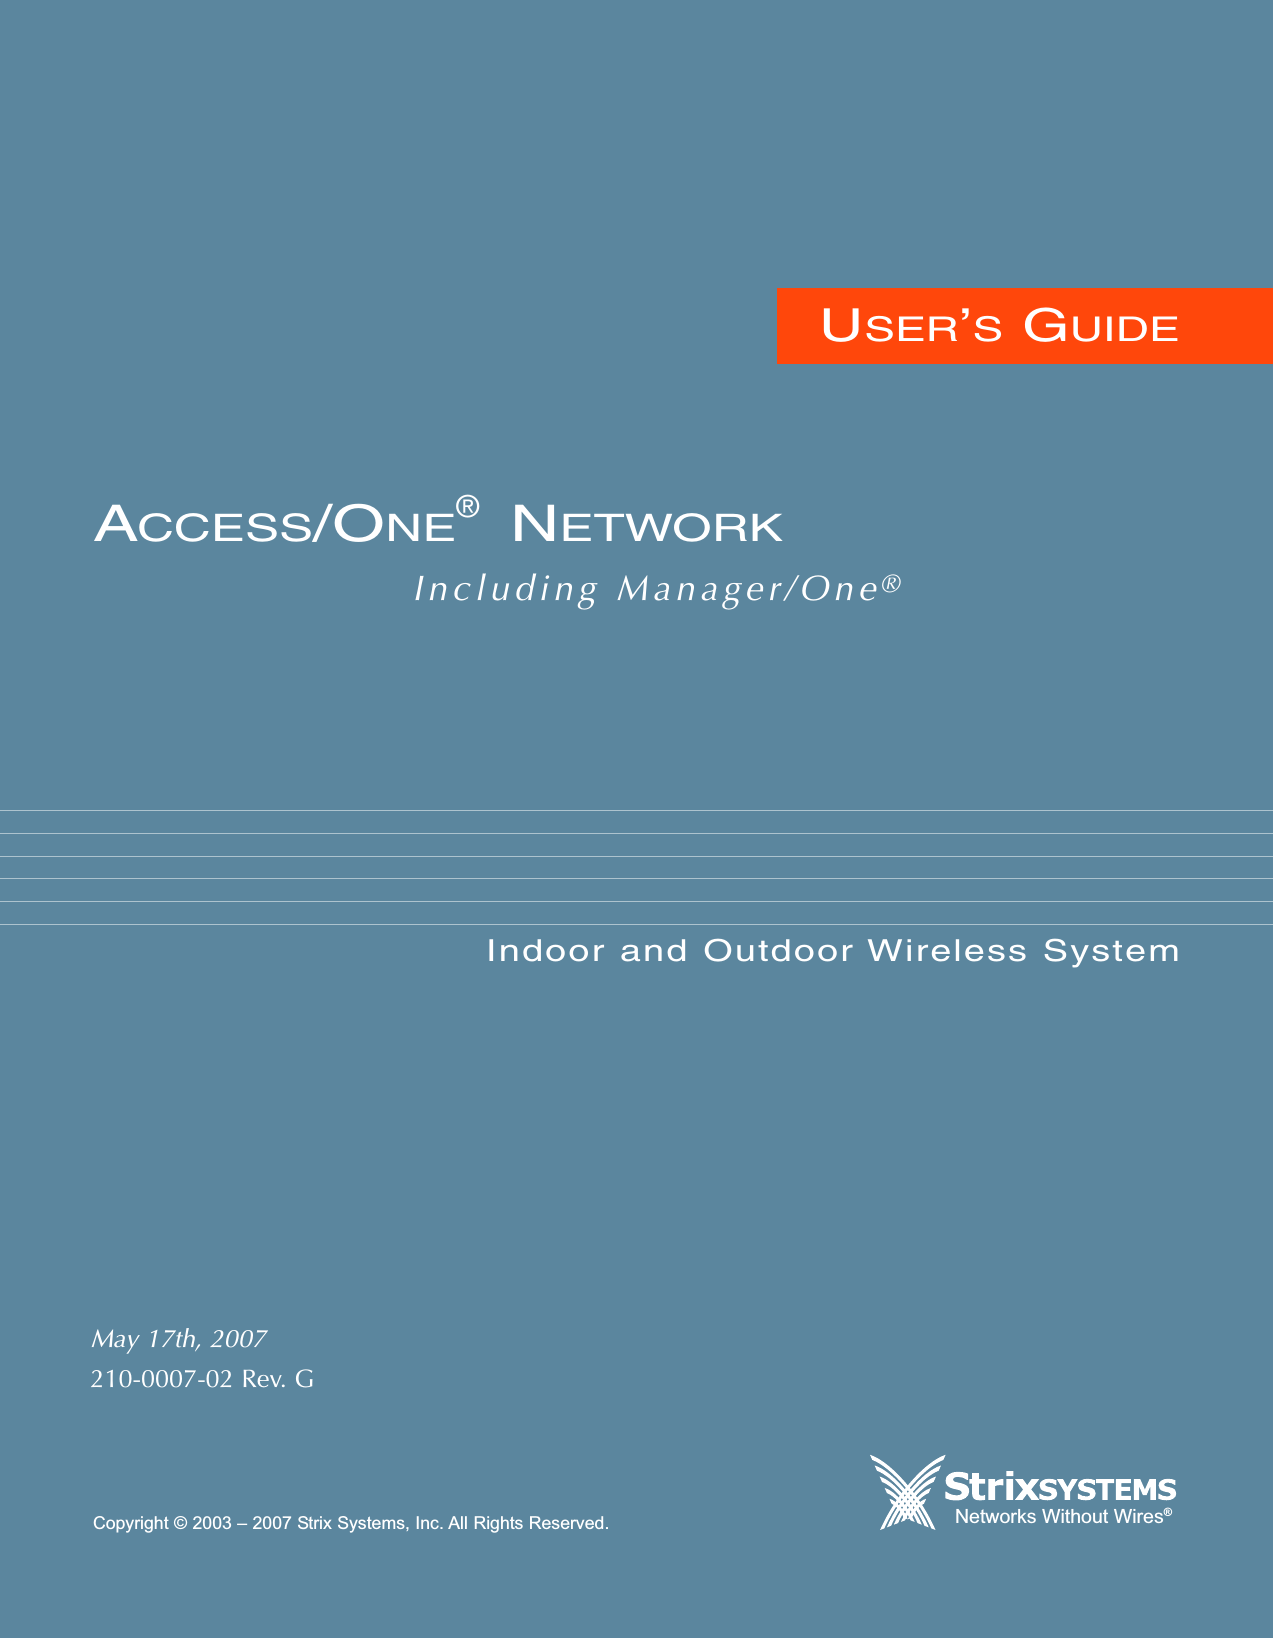 USER’SGUIDEIncluding Manager/One®ACCESS/ONE®NETWORKIndoor and Outdoor Wireless SystemNetworks Without Wires®Copyright © 2003 – 2007 Strix Systems, Inc. All Rights Reserved.May 17th, 2007210-0007-02 Rev. G